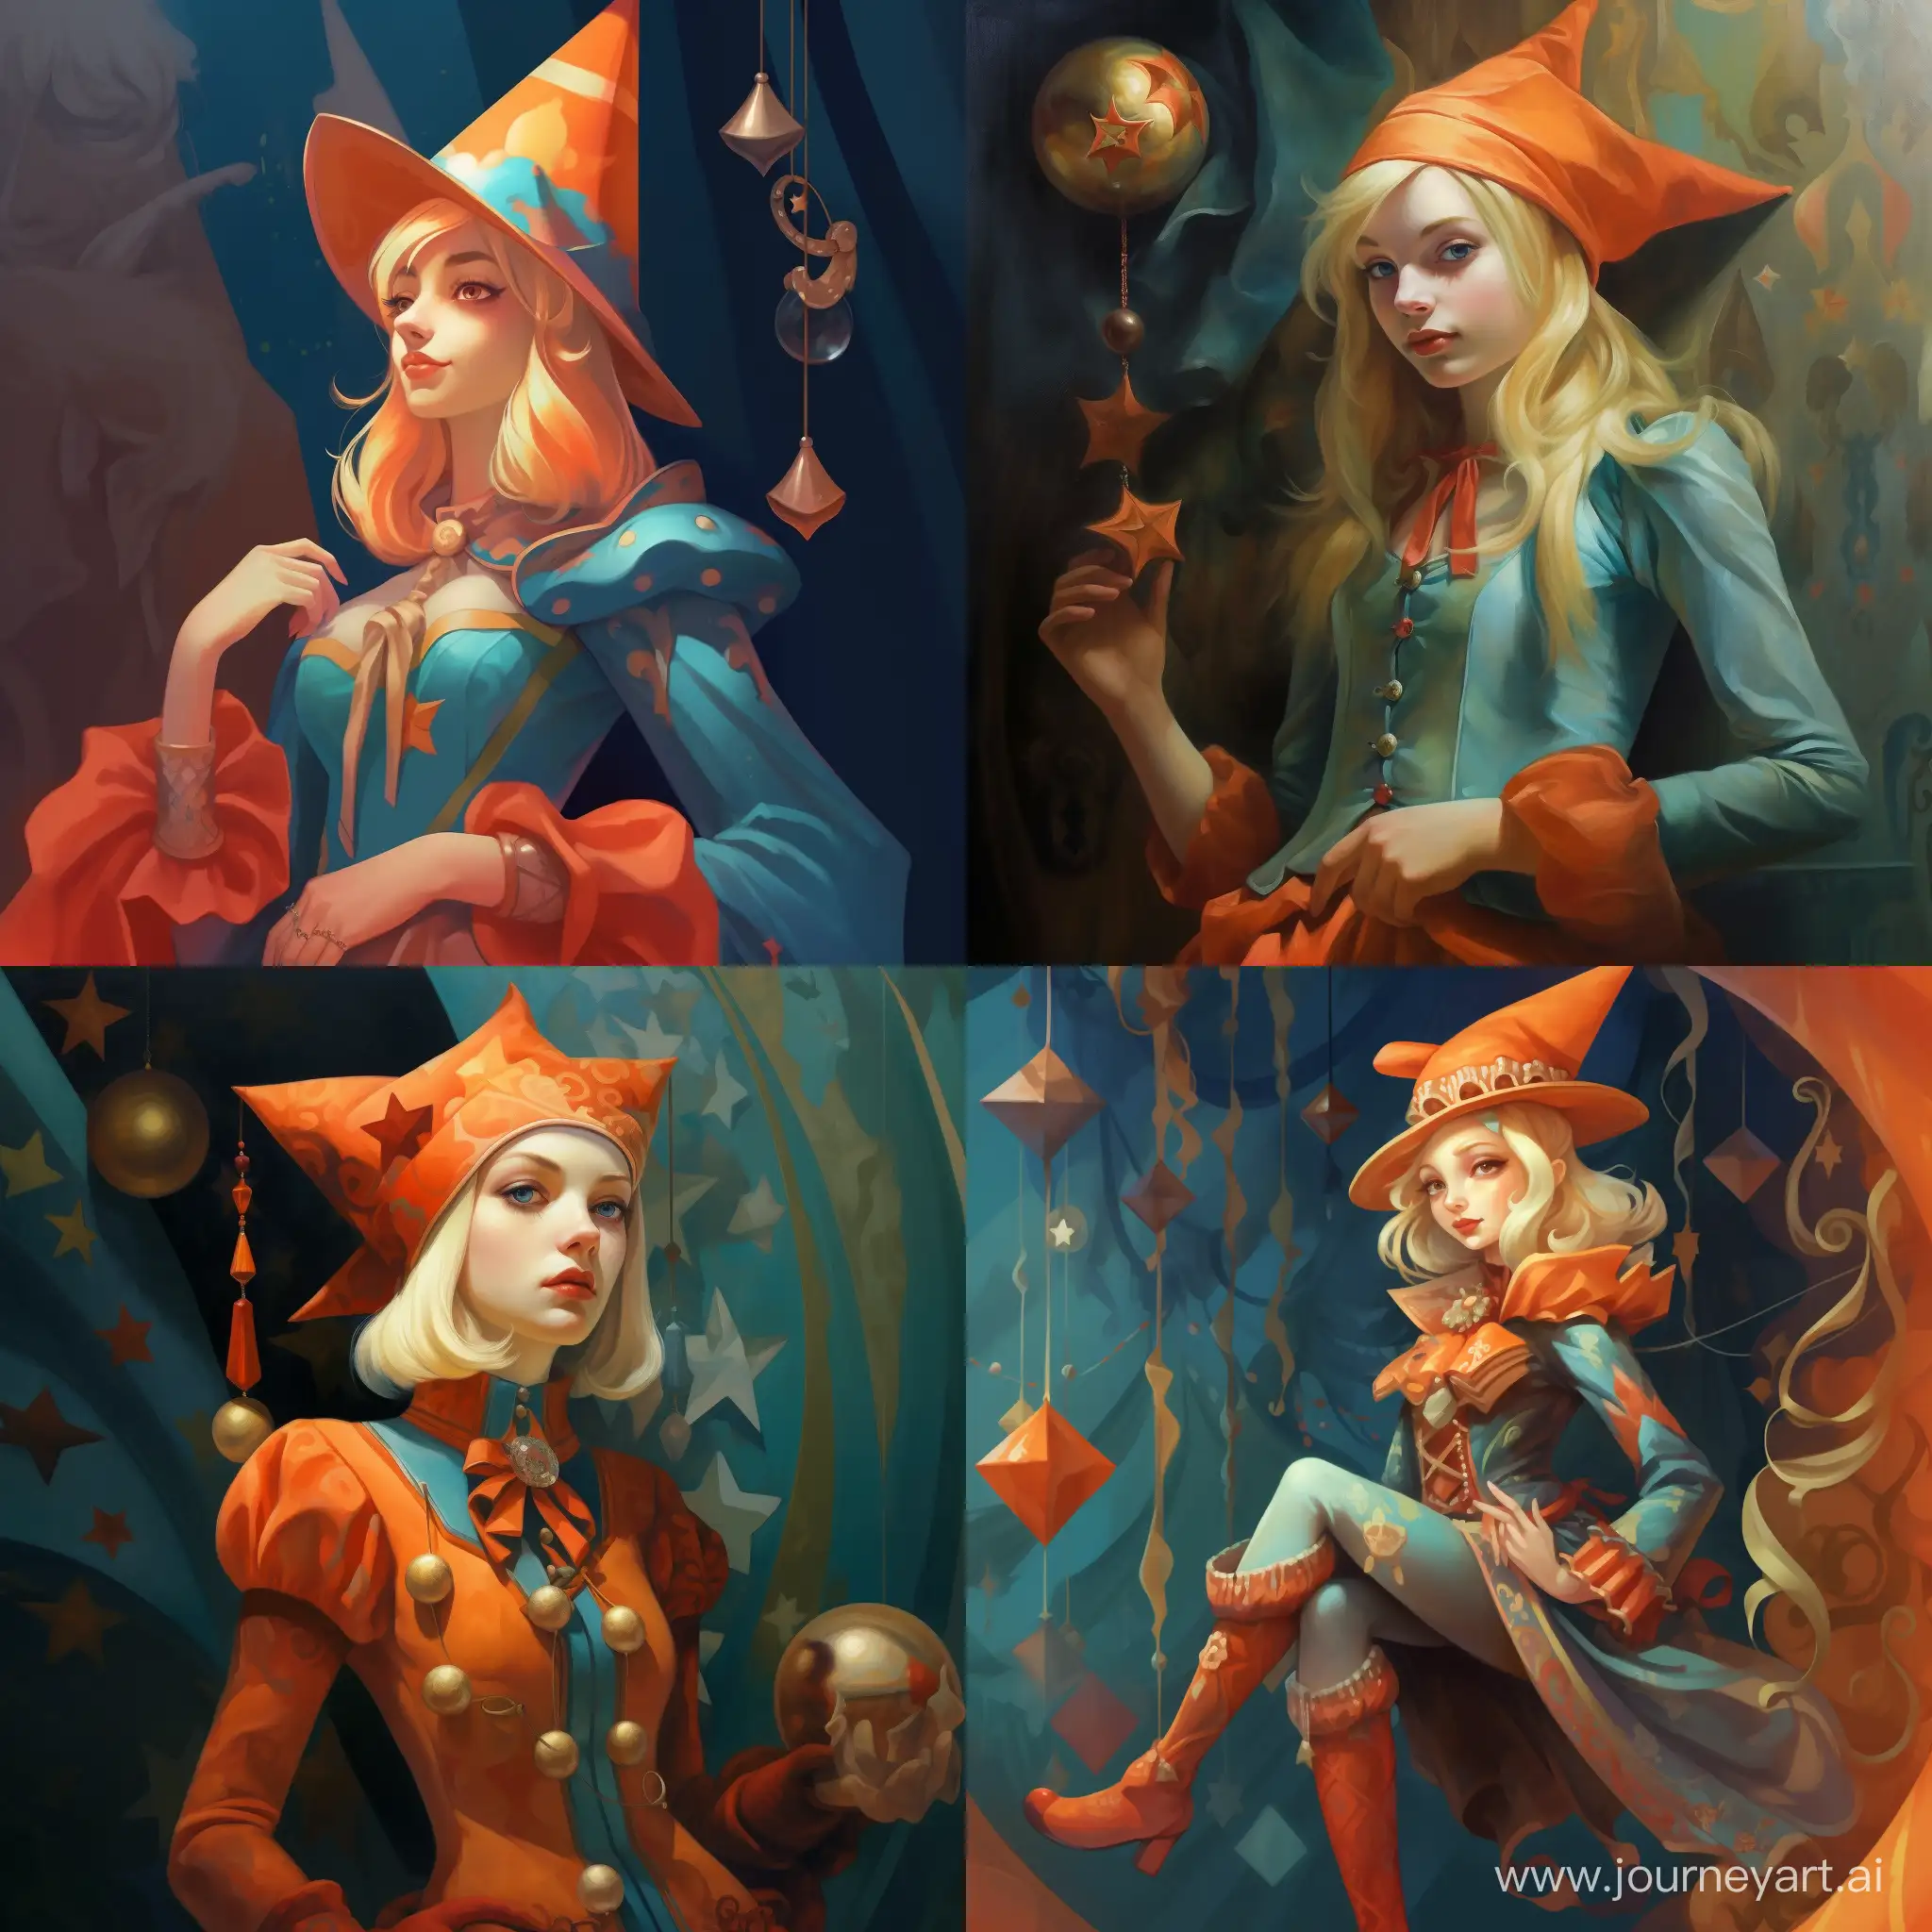 Enchanting-Jester-Girl-in-Vibrant-Orange-and-Turquoise-Costume